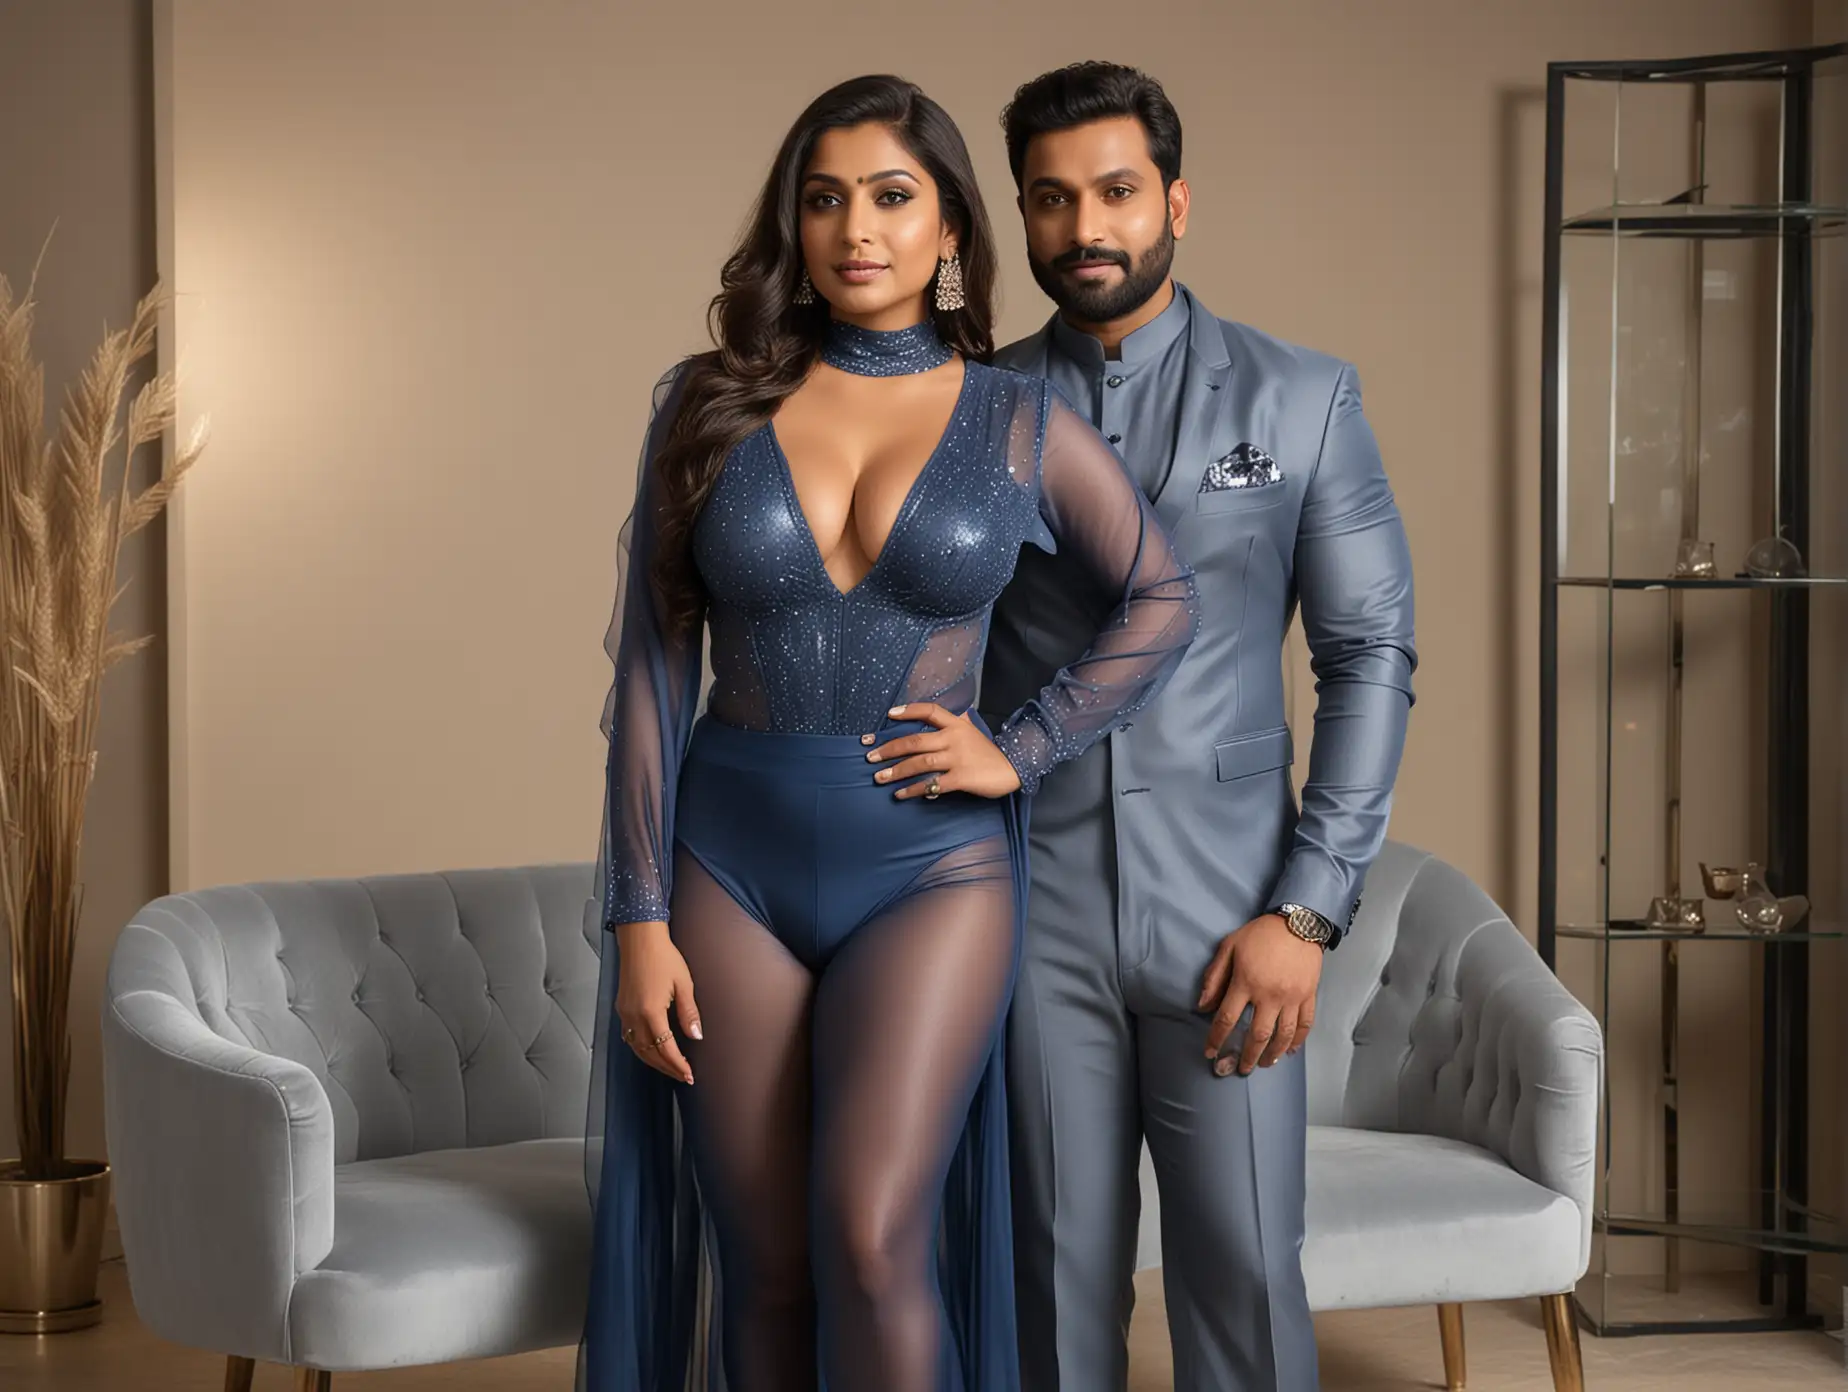 Generate full  body front view image of a 45 year old very busty and curvy Indian woman  wearing skin tight shining blue chiffon full sleeve and skin tight  full pant see through full transparent chiffon bodysuit  standing with  one boyfriend who is in a formal grey suit in the same chair and hugging her from behind in a modern boss chamber